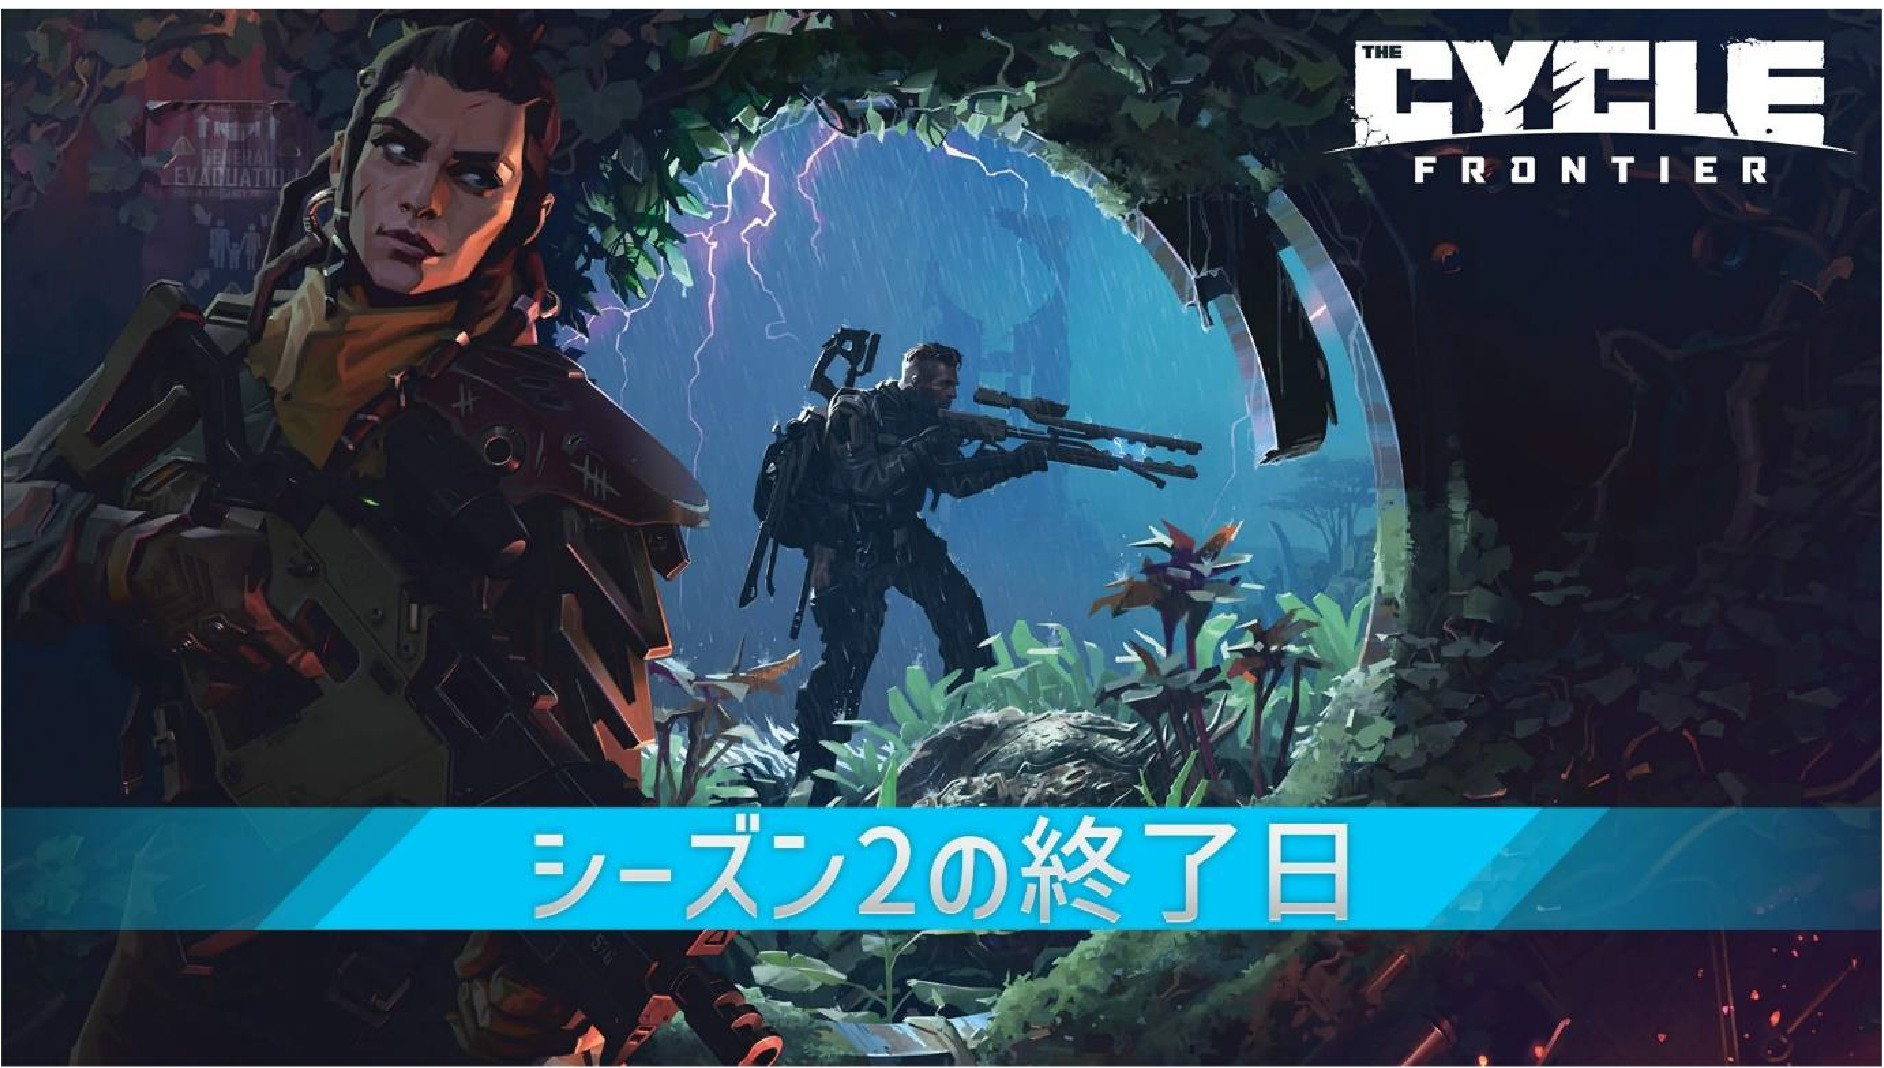 Course: Frontier Season 3 starts March 29. Final scan done (reset), makes it easier for new players to get into the timing